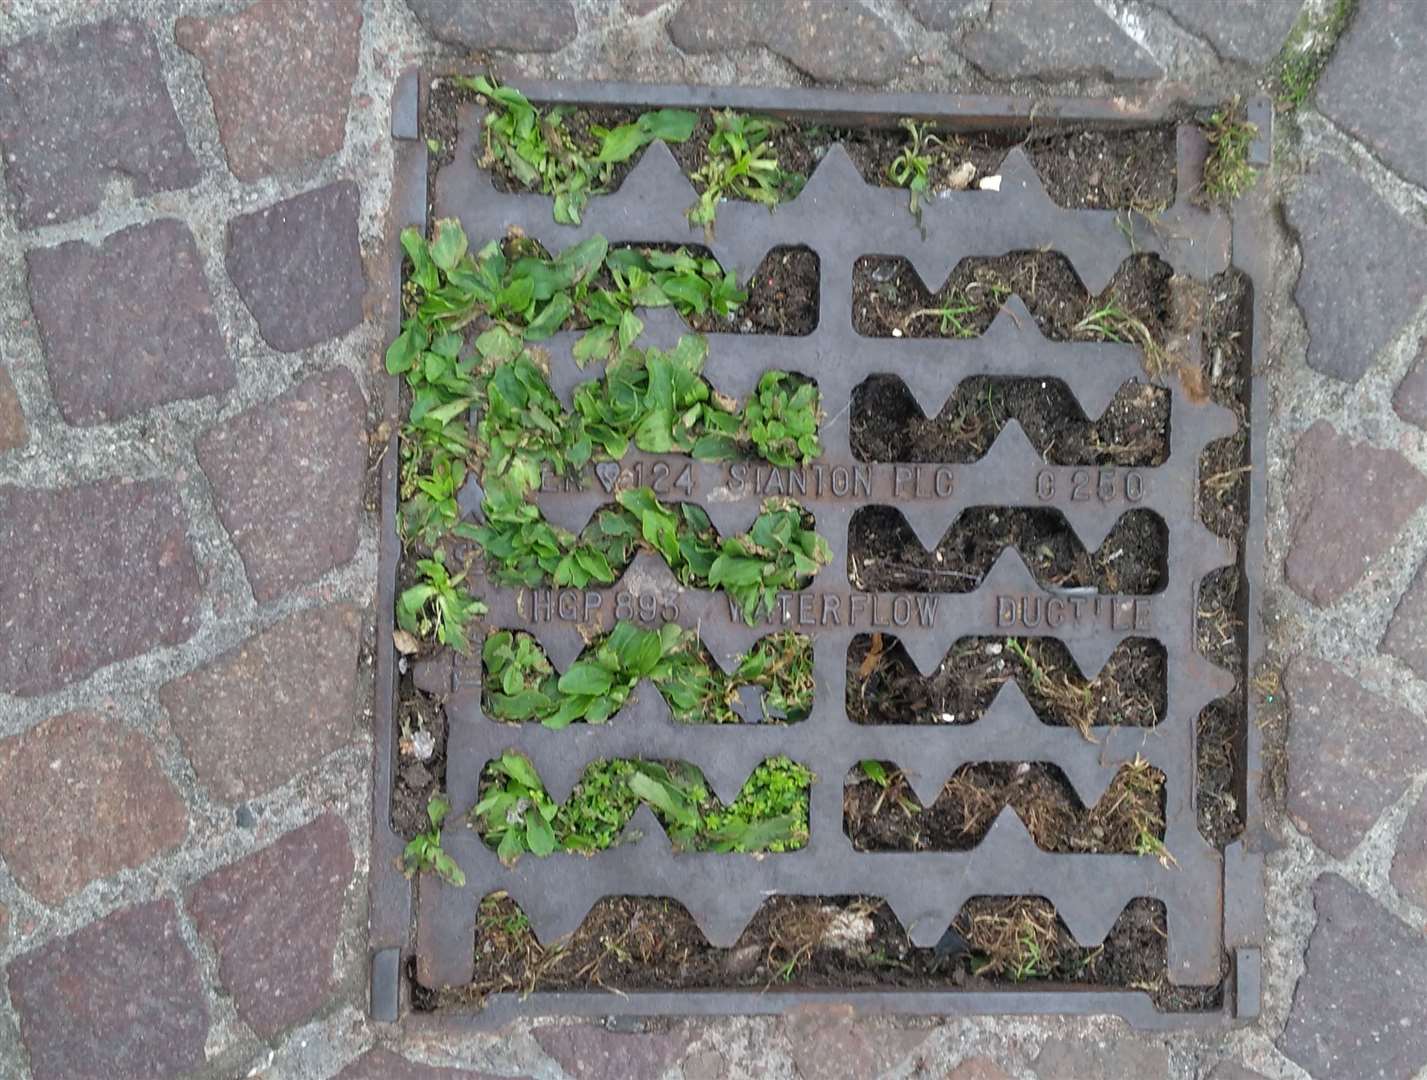 Weeds are growing out of this drain, near Lidl